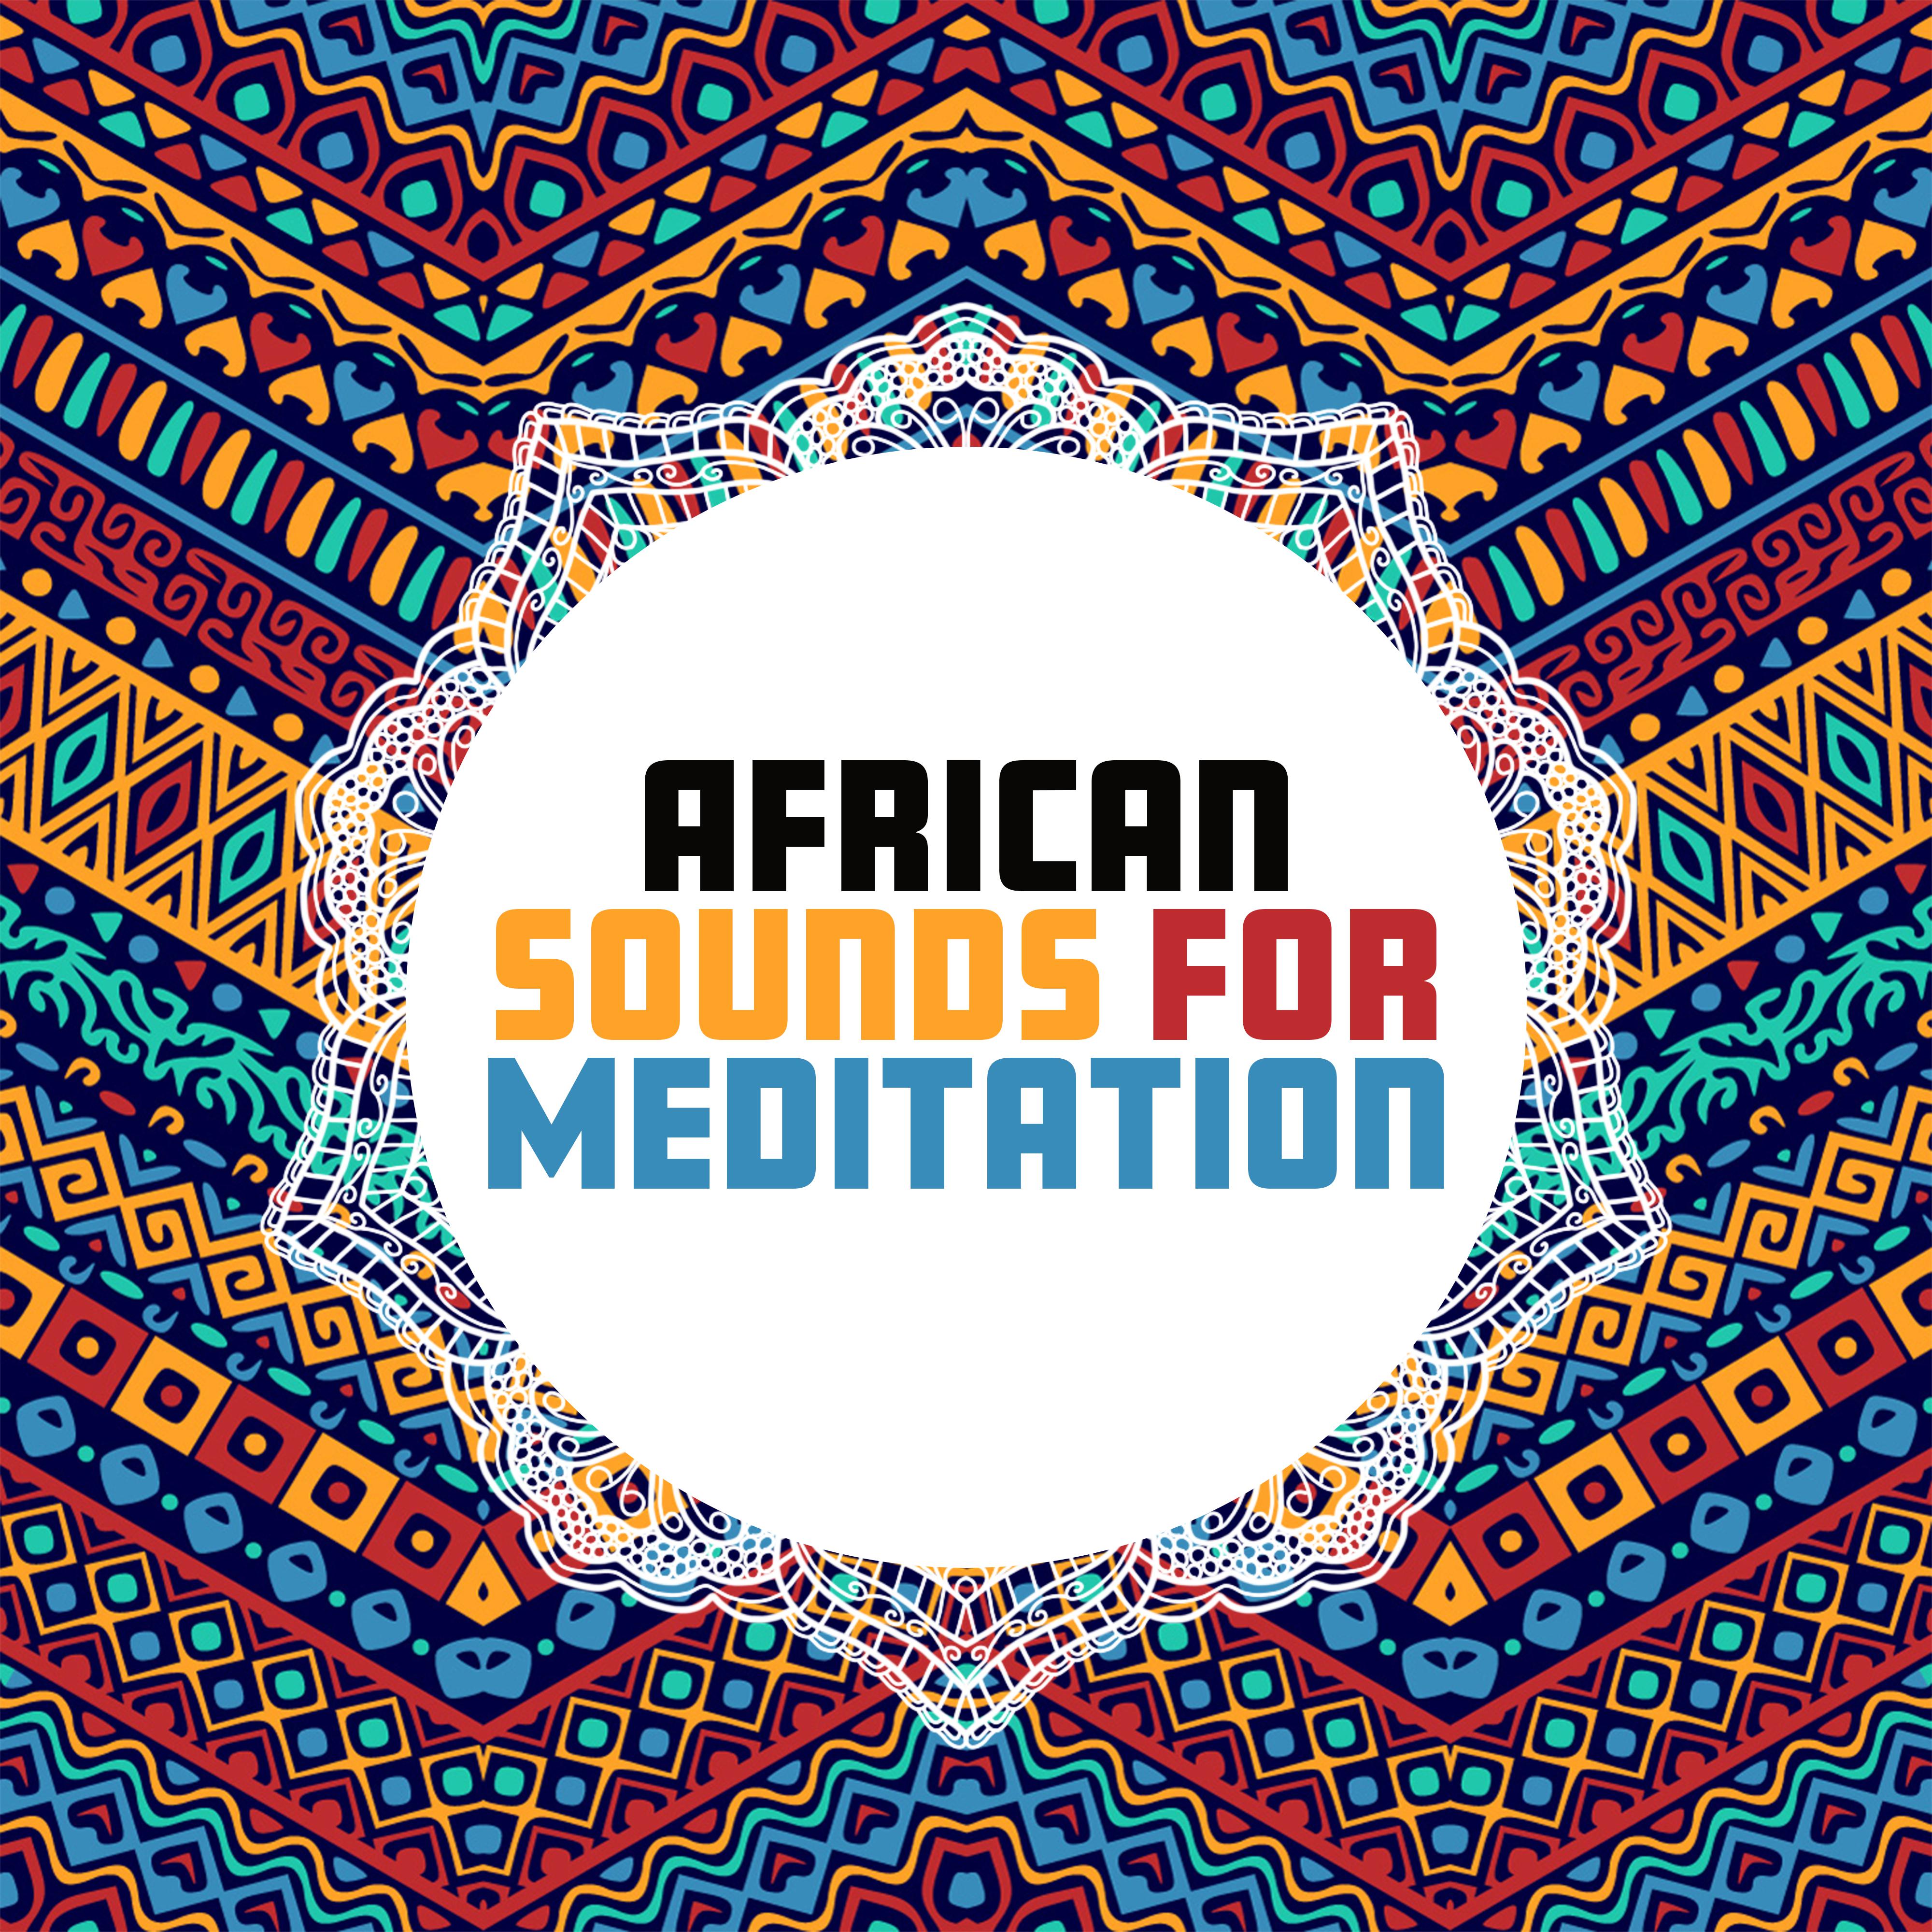 African Sounds for Meditation  New Age Music for Shamanic Meditation  Relaxation, Flute Music, Zen, African Rhythms to Calm Down